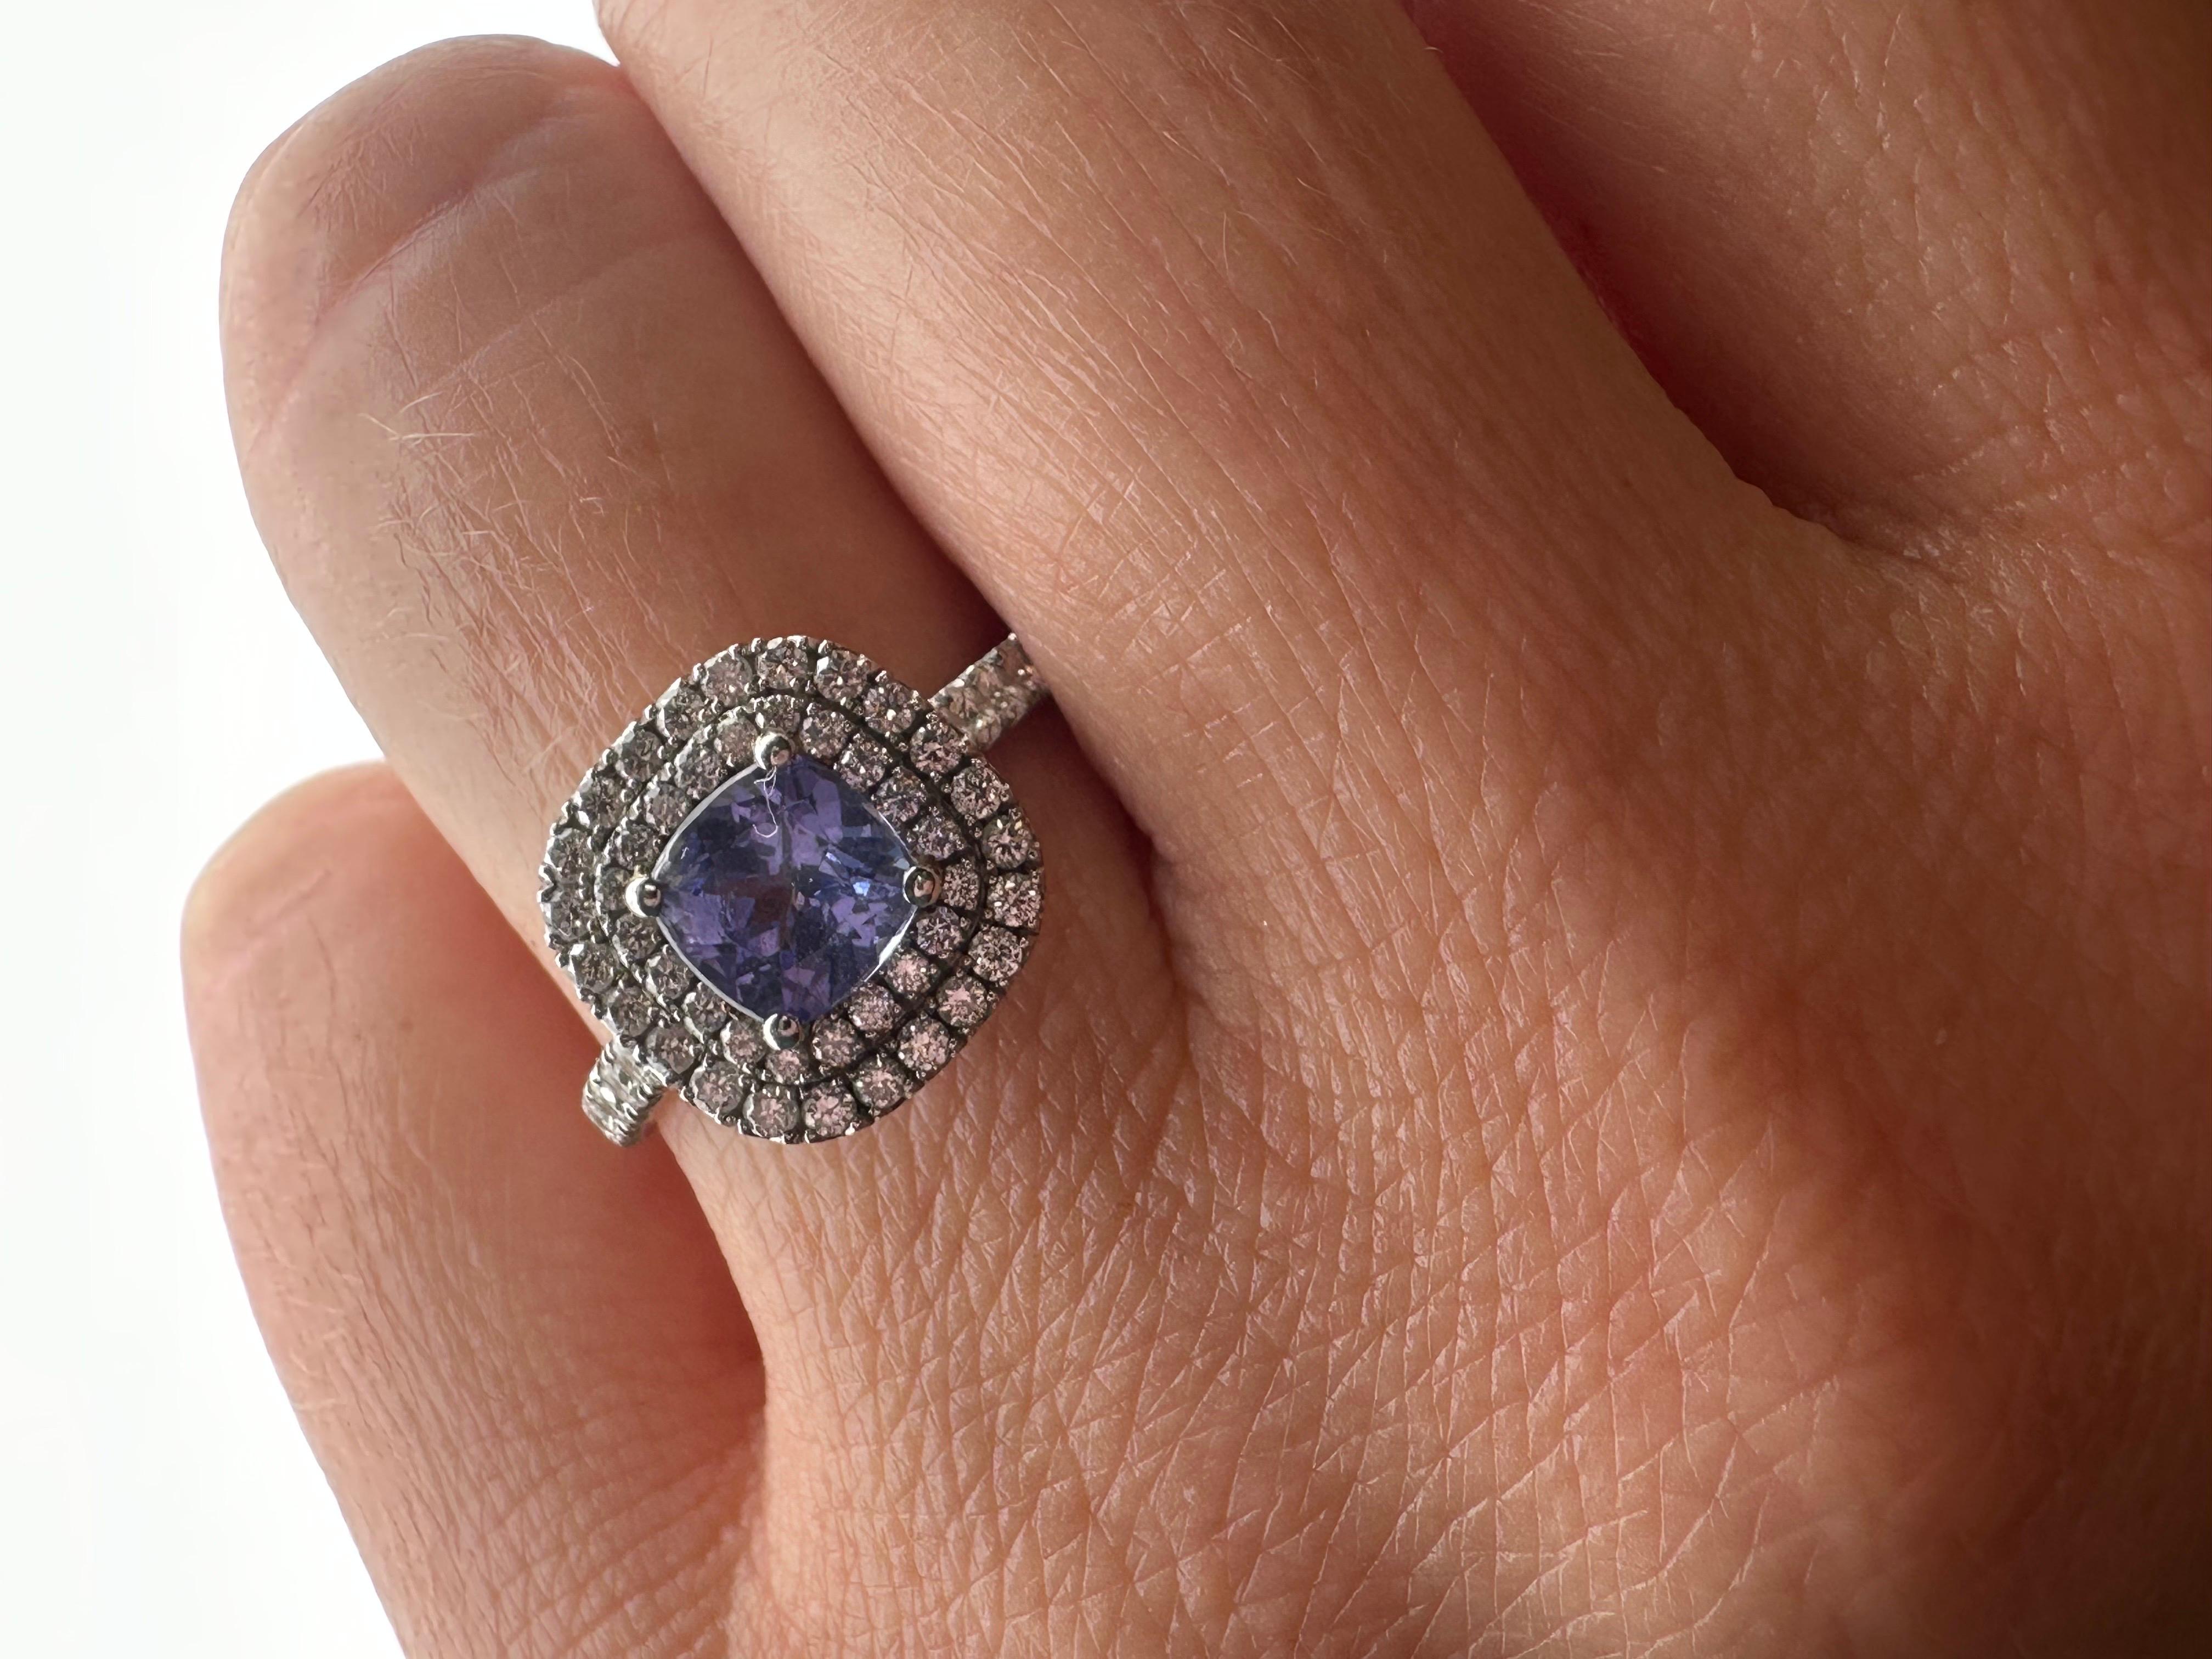 Stunnning modern engagement ring made with one cushion tanzanite and natural premium diamonds in 14KT white gold.

RE-SIZE IS FREE, PLEASE MESSAGE US YOUR FINGER SIZE!

Natural Tanzanite :
Carat: 1.12ct
Clarity: Slightly Included (Hard to see